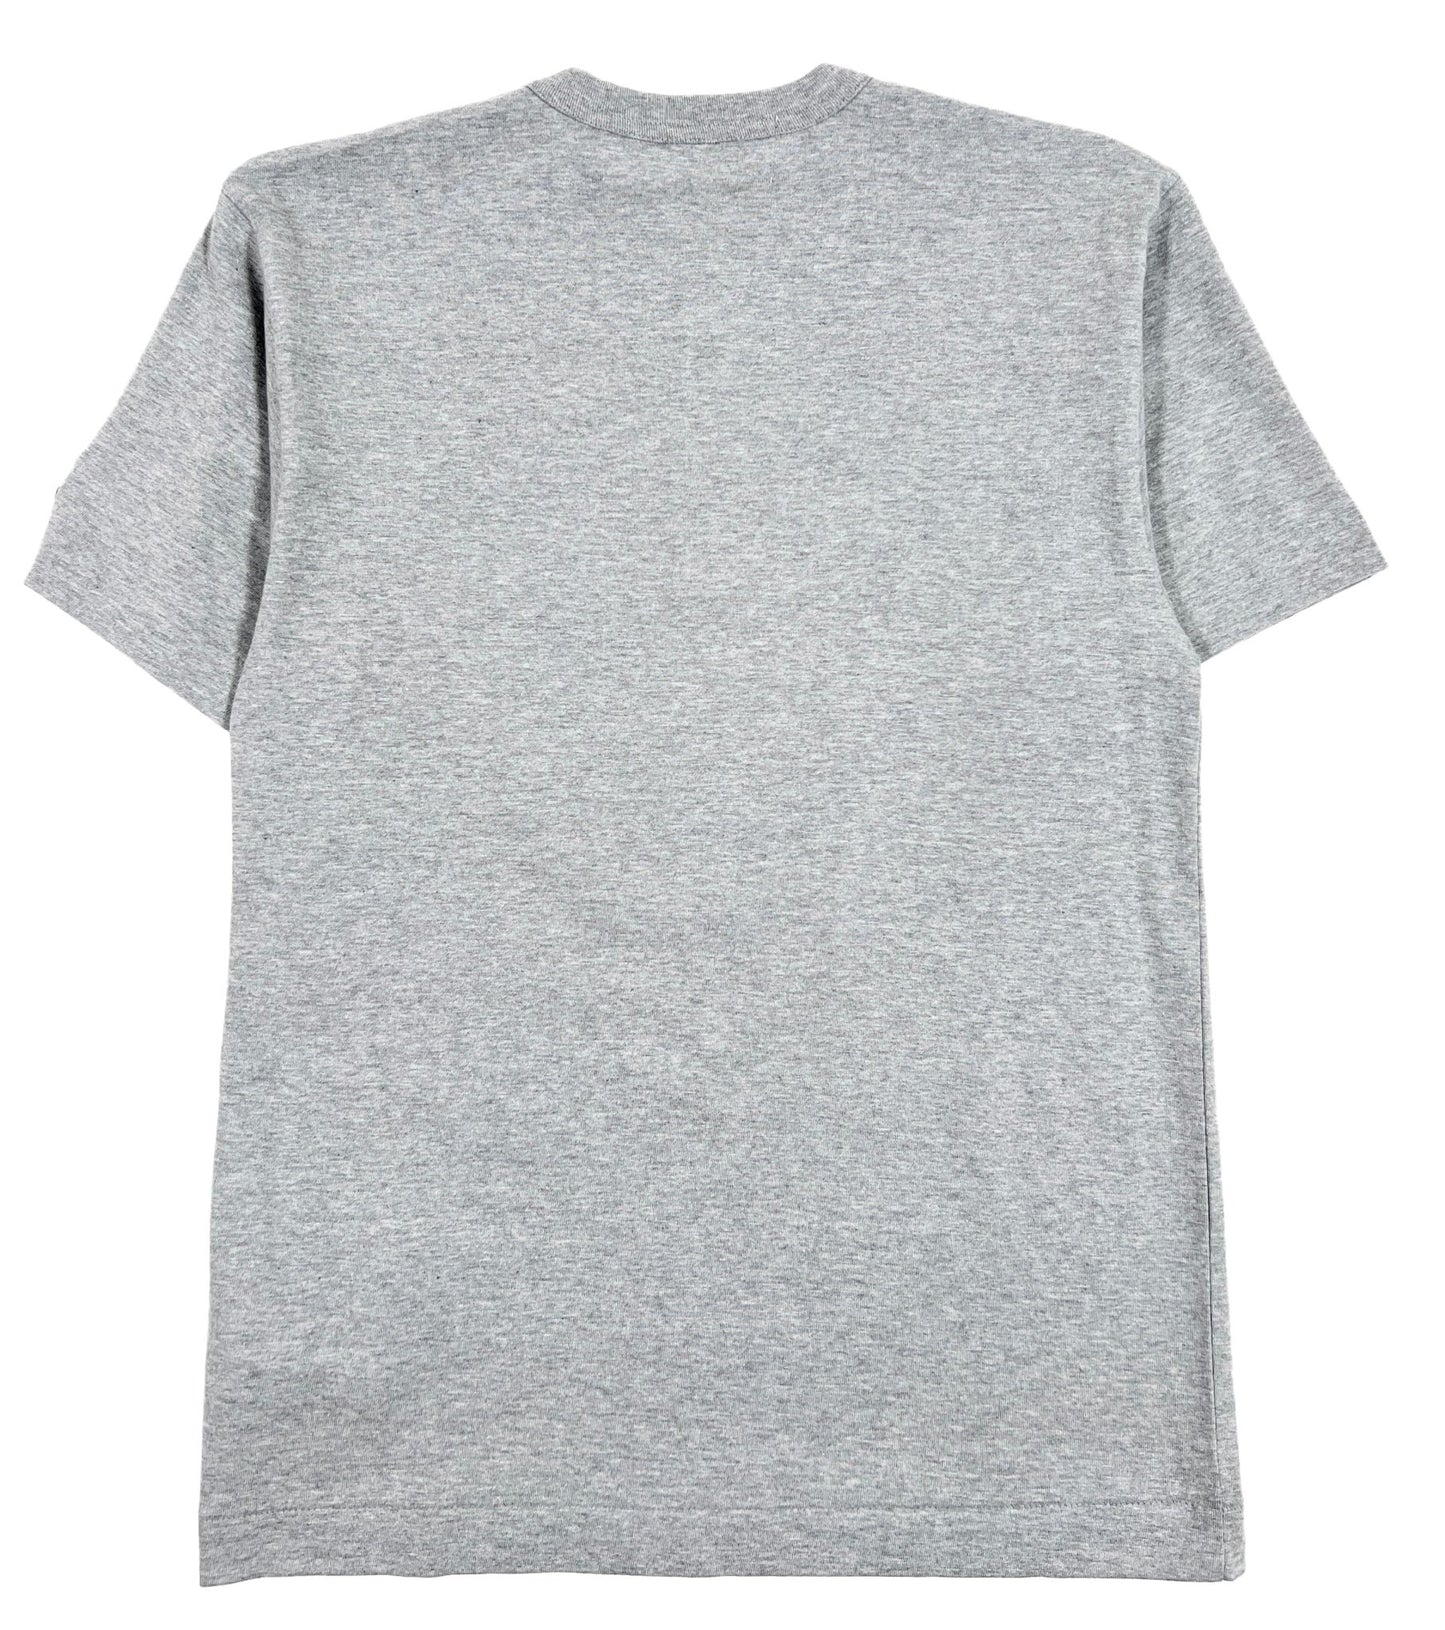 Comme des Garçons grey vintage reworked t-shirt with padded front panels —  fall 2018 - V A N II T A S